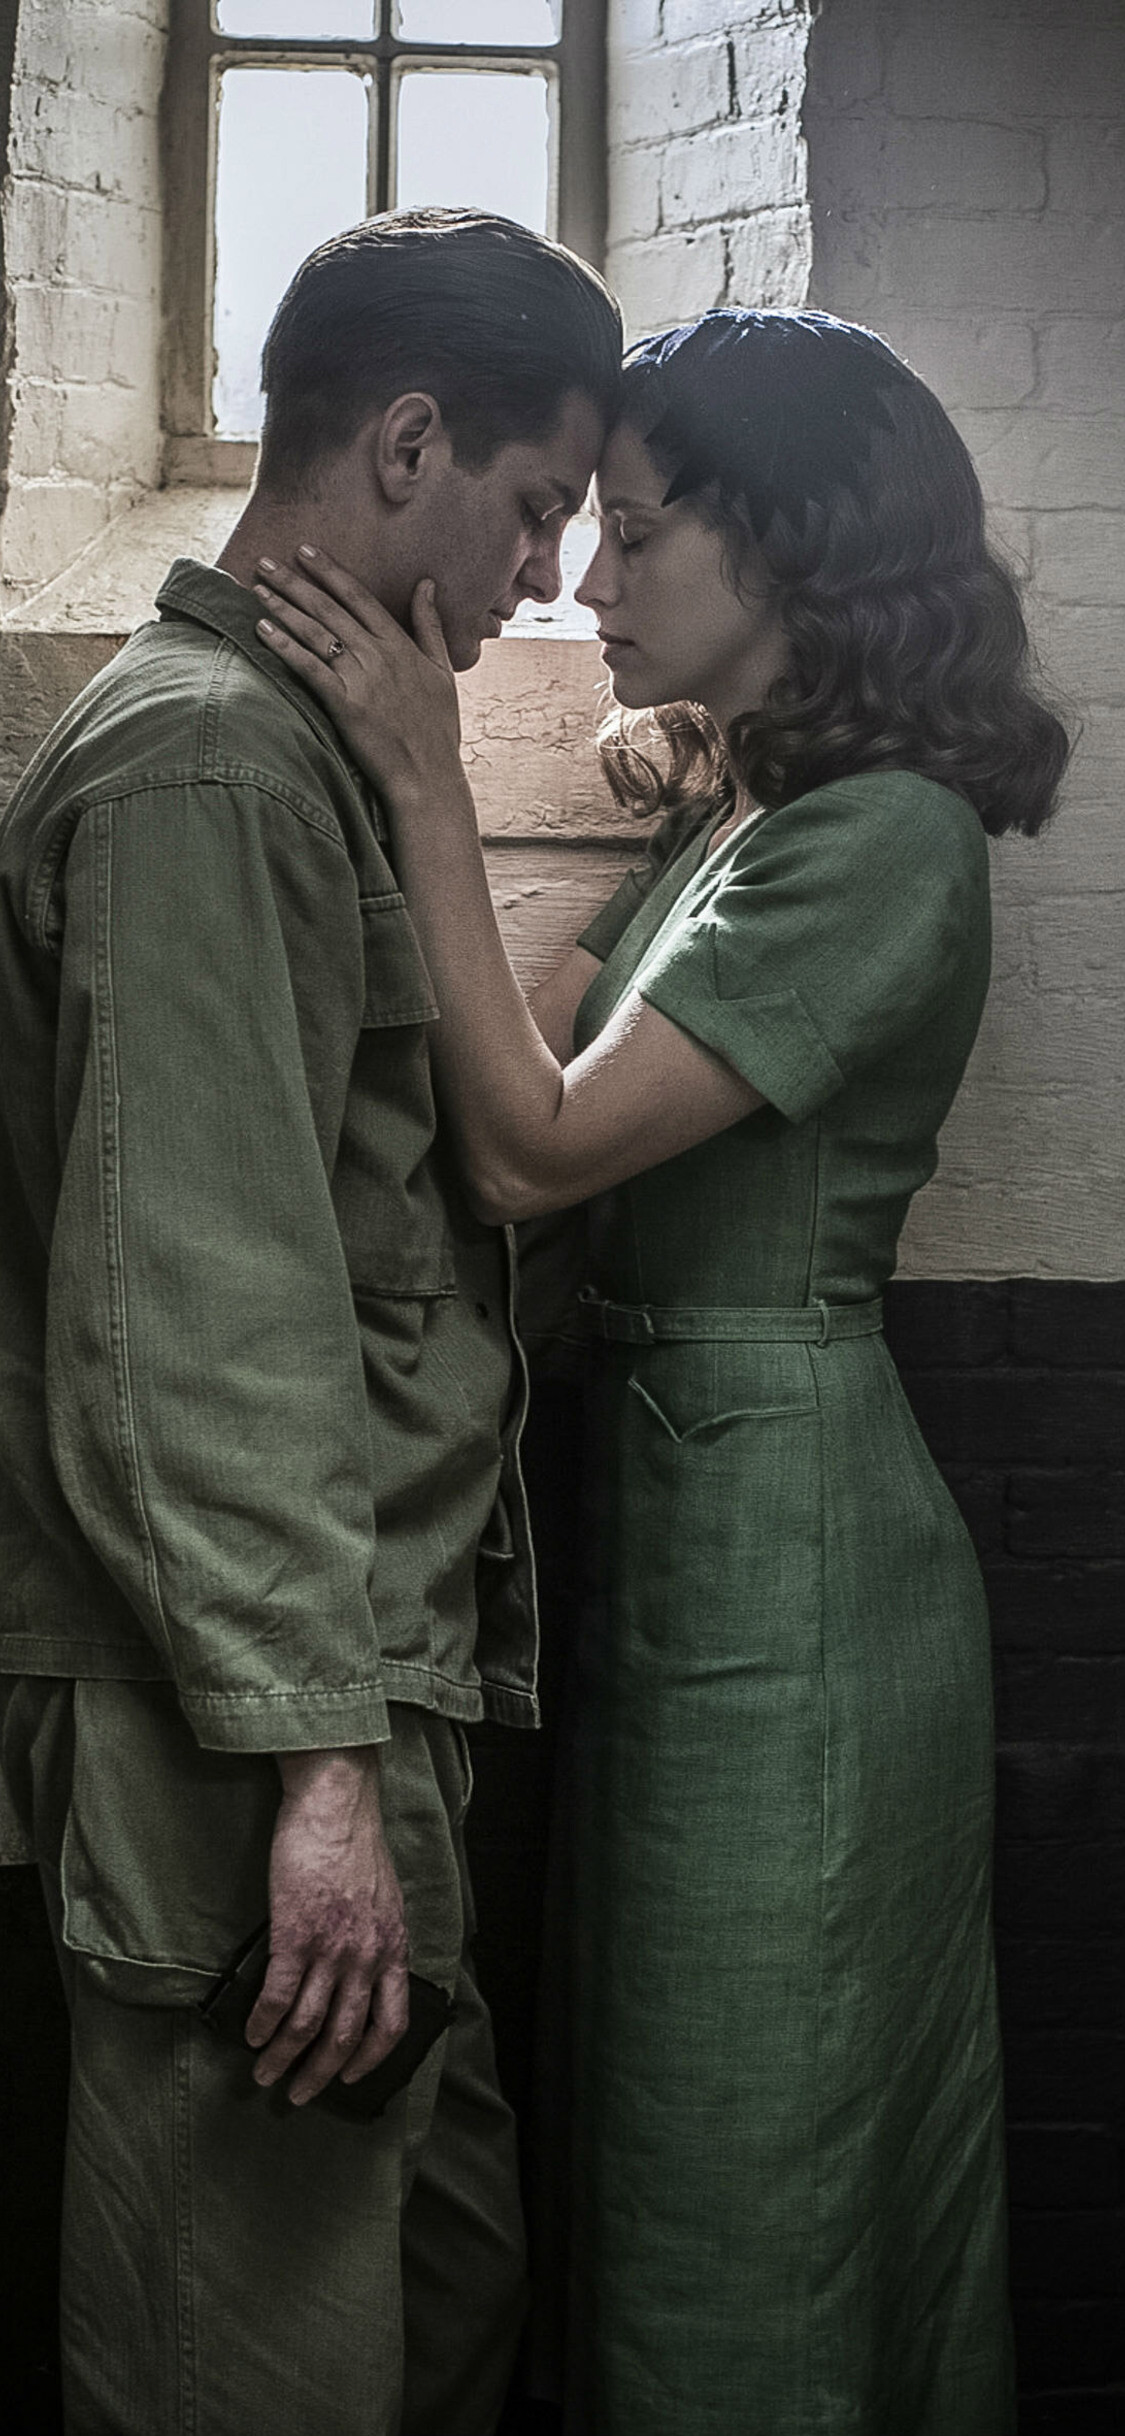 Hacksaw Ridge: Andrew Garfield and Teresa Palmer as Desmond Doss and Dorothy Schutte. 1130x2440 HD Background.